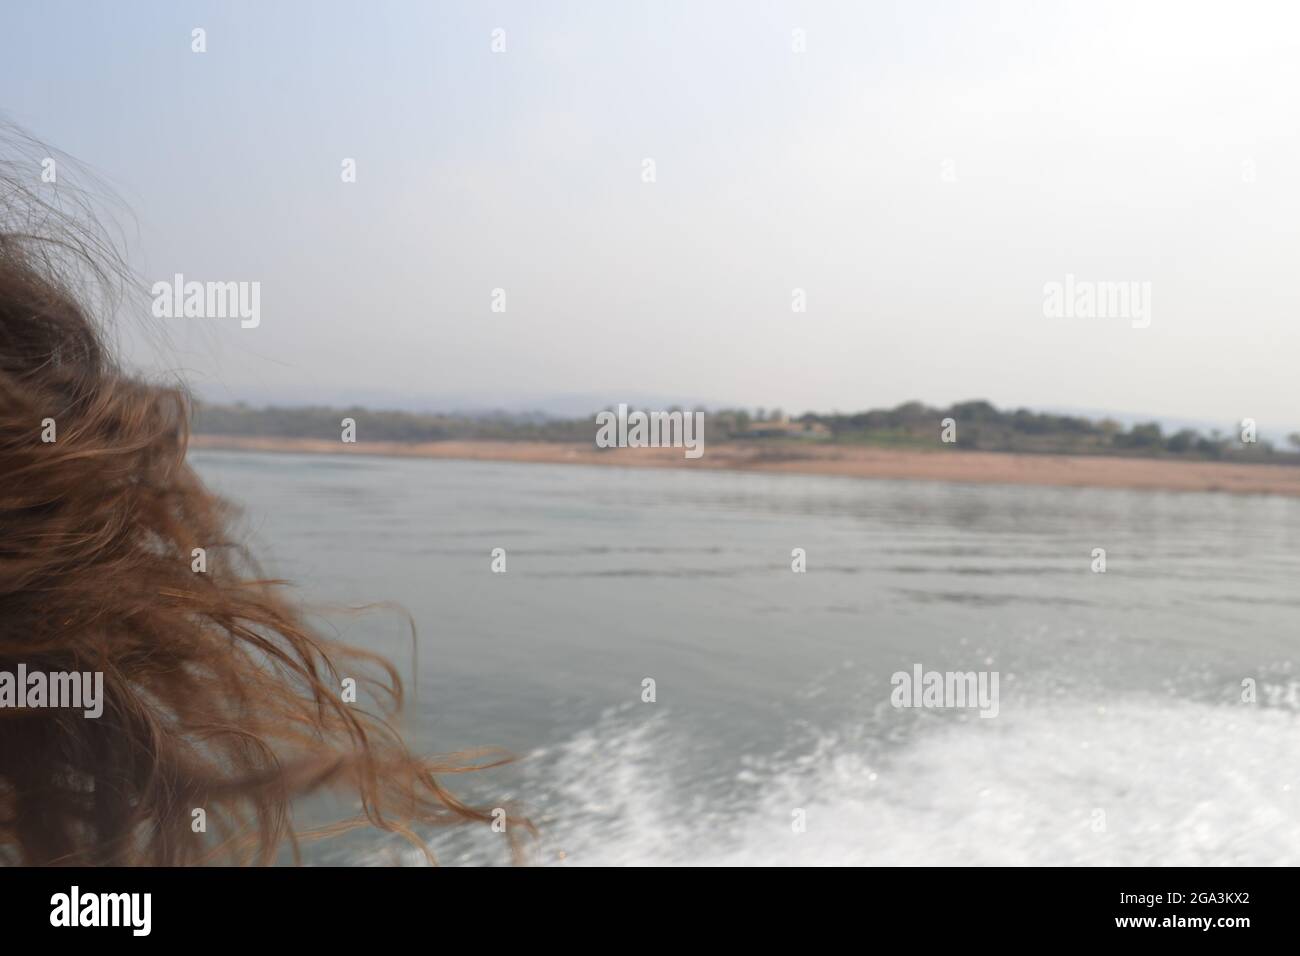 Soft hair moving with the wind during boat ride which gives a calm sensation when the eyes finally focus the hair. Stock Photo